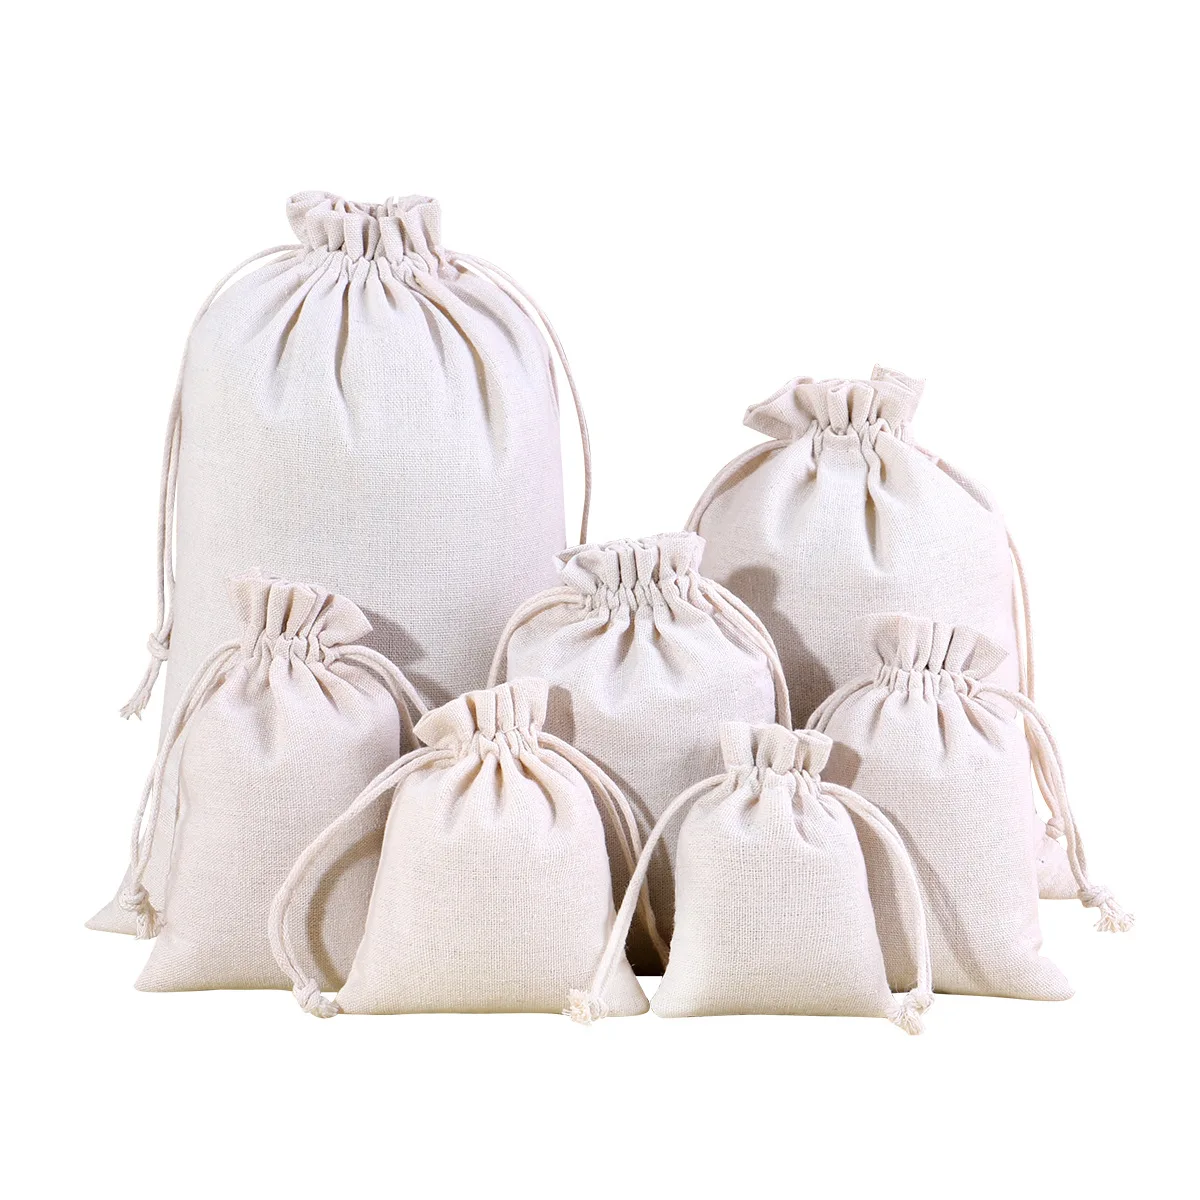 

50pcs Cotton Burlap Jewelry Packaging Pouches Wedding Christmas Party Candy Bag Present Marriage Jute Drawstring Gift Bag